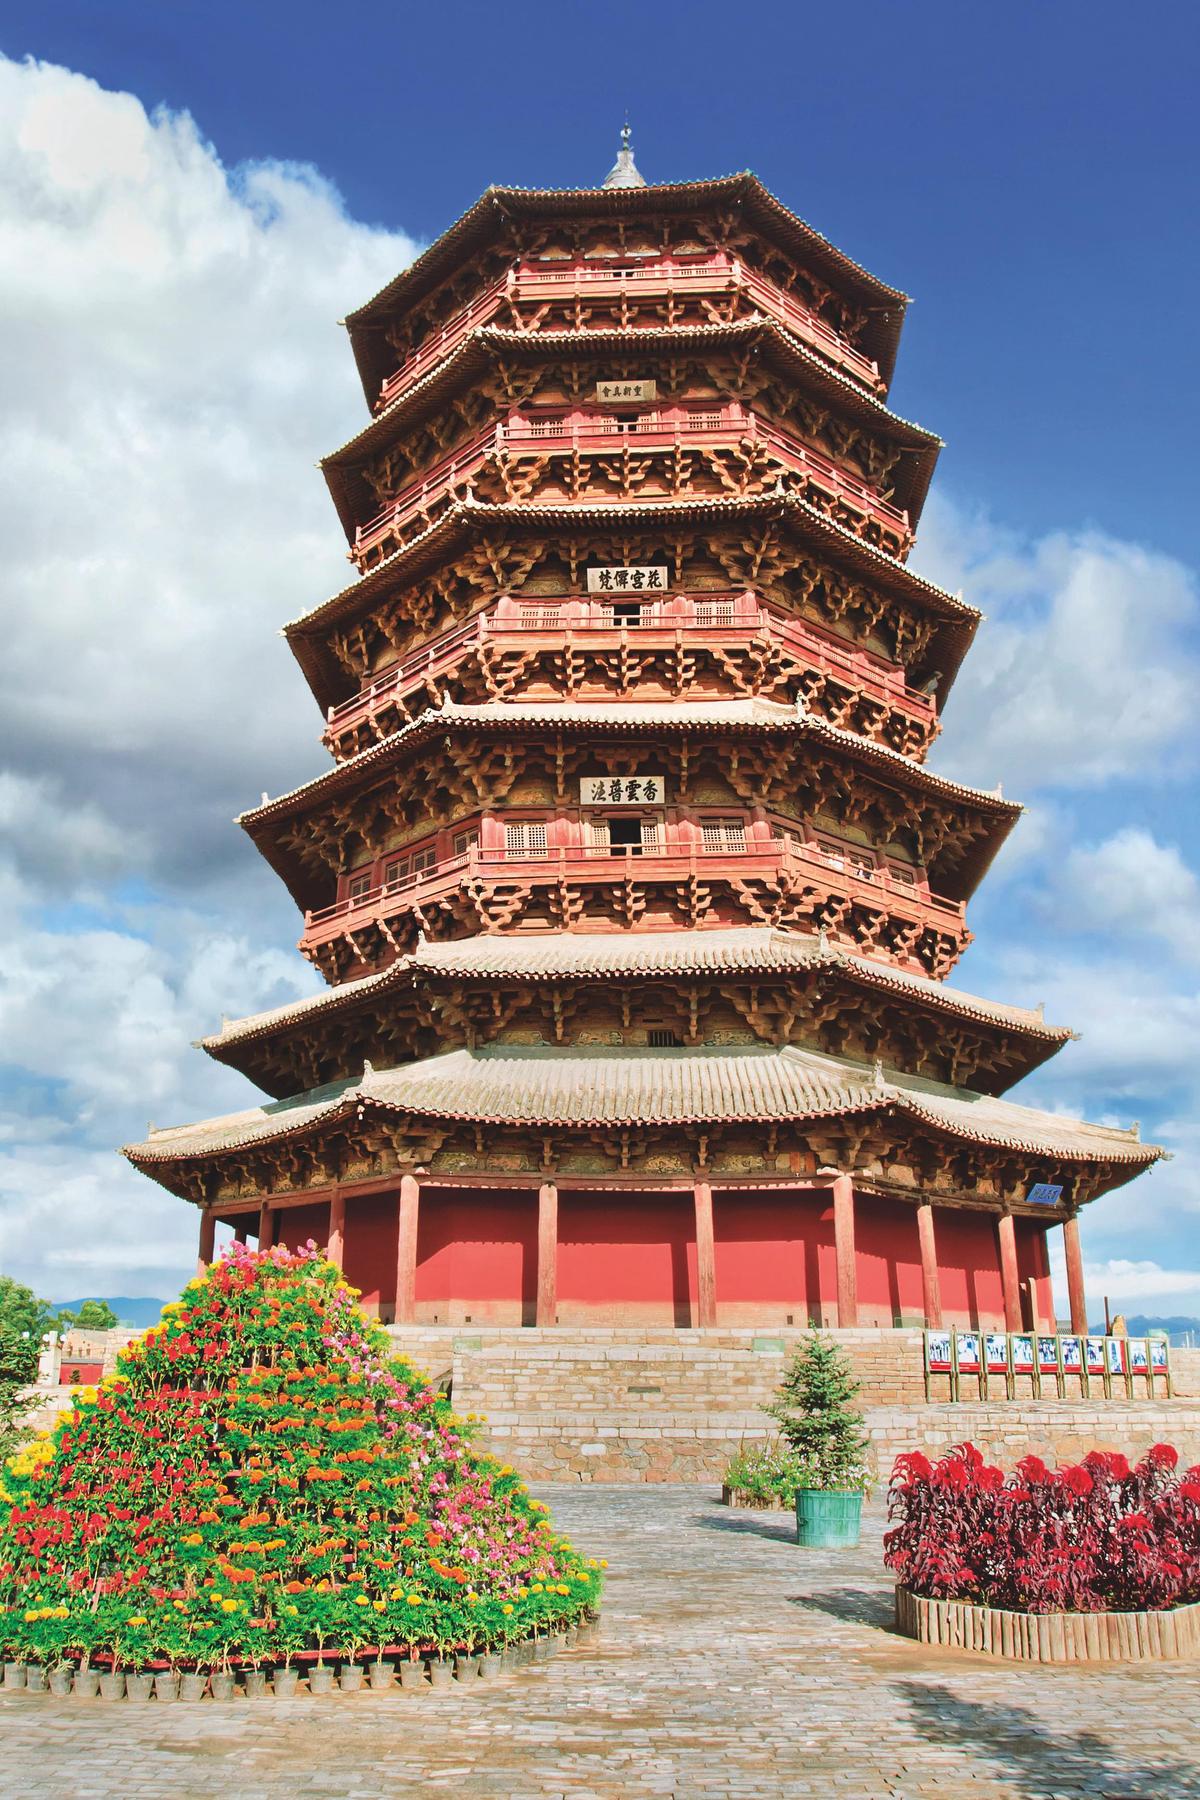 YINGXIAN-CHINA-SEPT. 8:Famous wooden pagoda of the Buddhist Fogong Temple, Yingxian, the oldest existent fully wooden pagoda still standing in China, UNESCO world heritage. Yingxian, Sept. 8, 2006. (TonyV3112/Shutterstock)